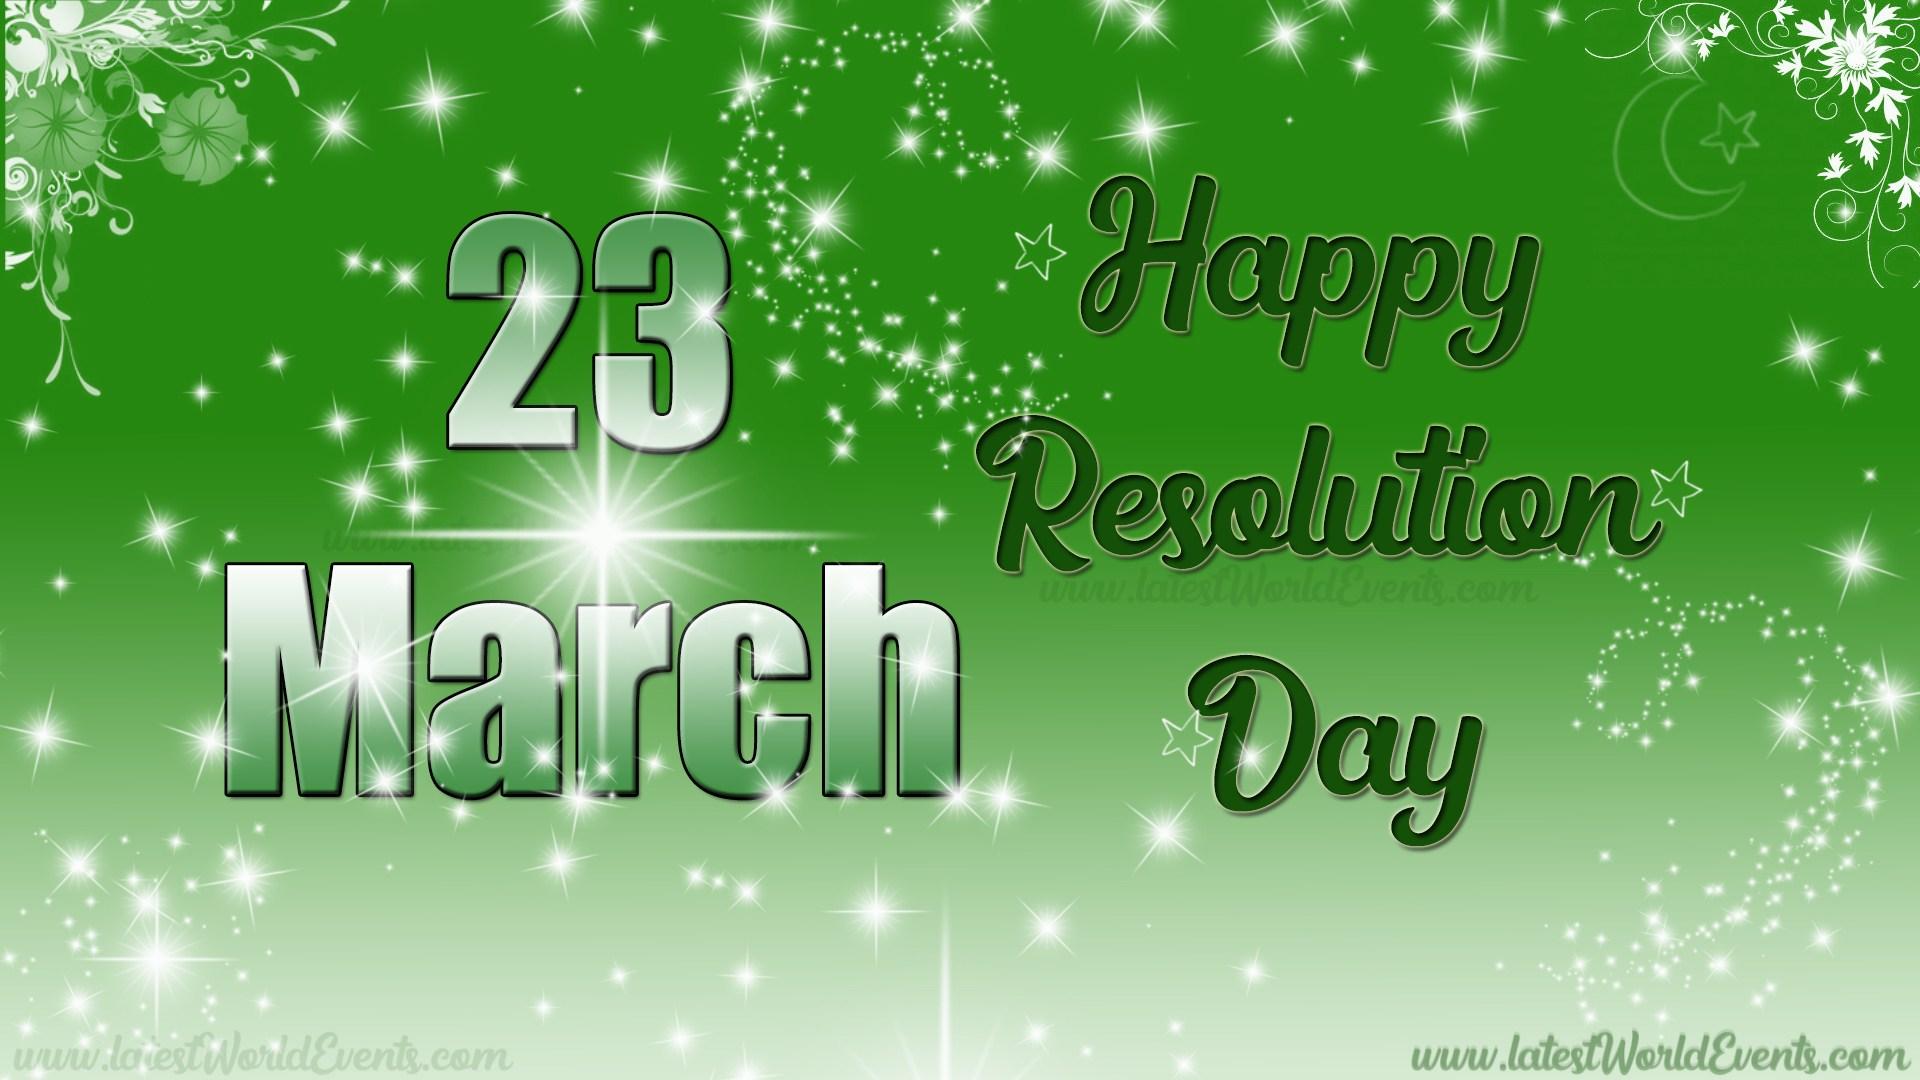 March Resolution Day Image World Events